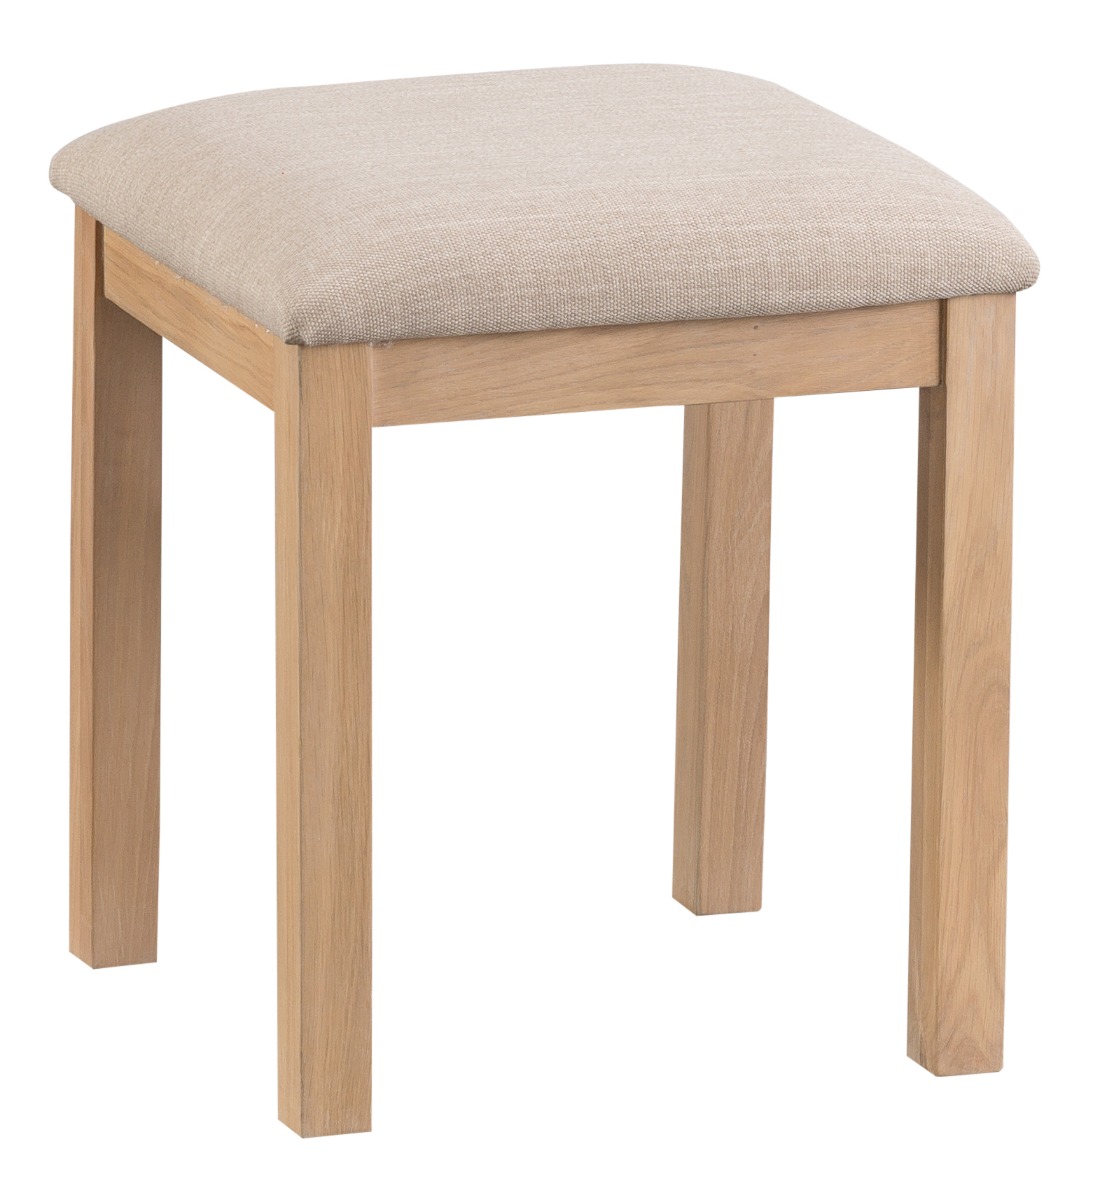 Bedroom Stools To Maximise Your Small Space Mysmallspace